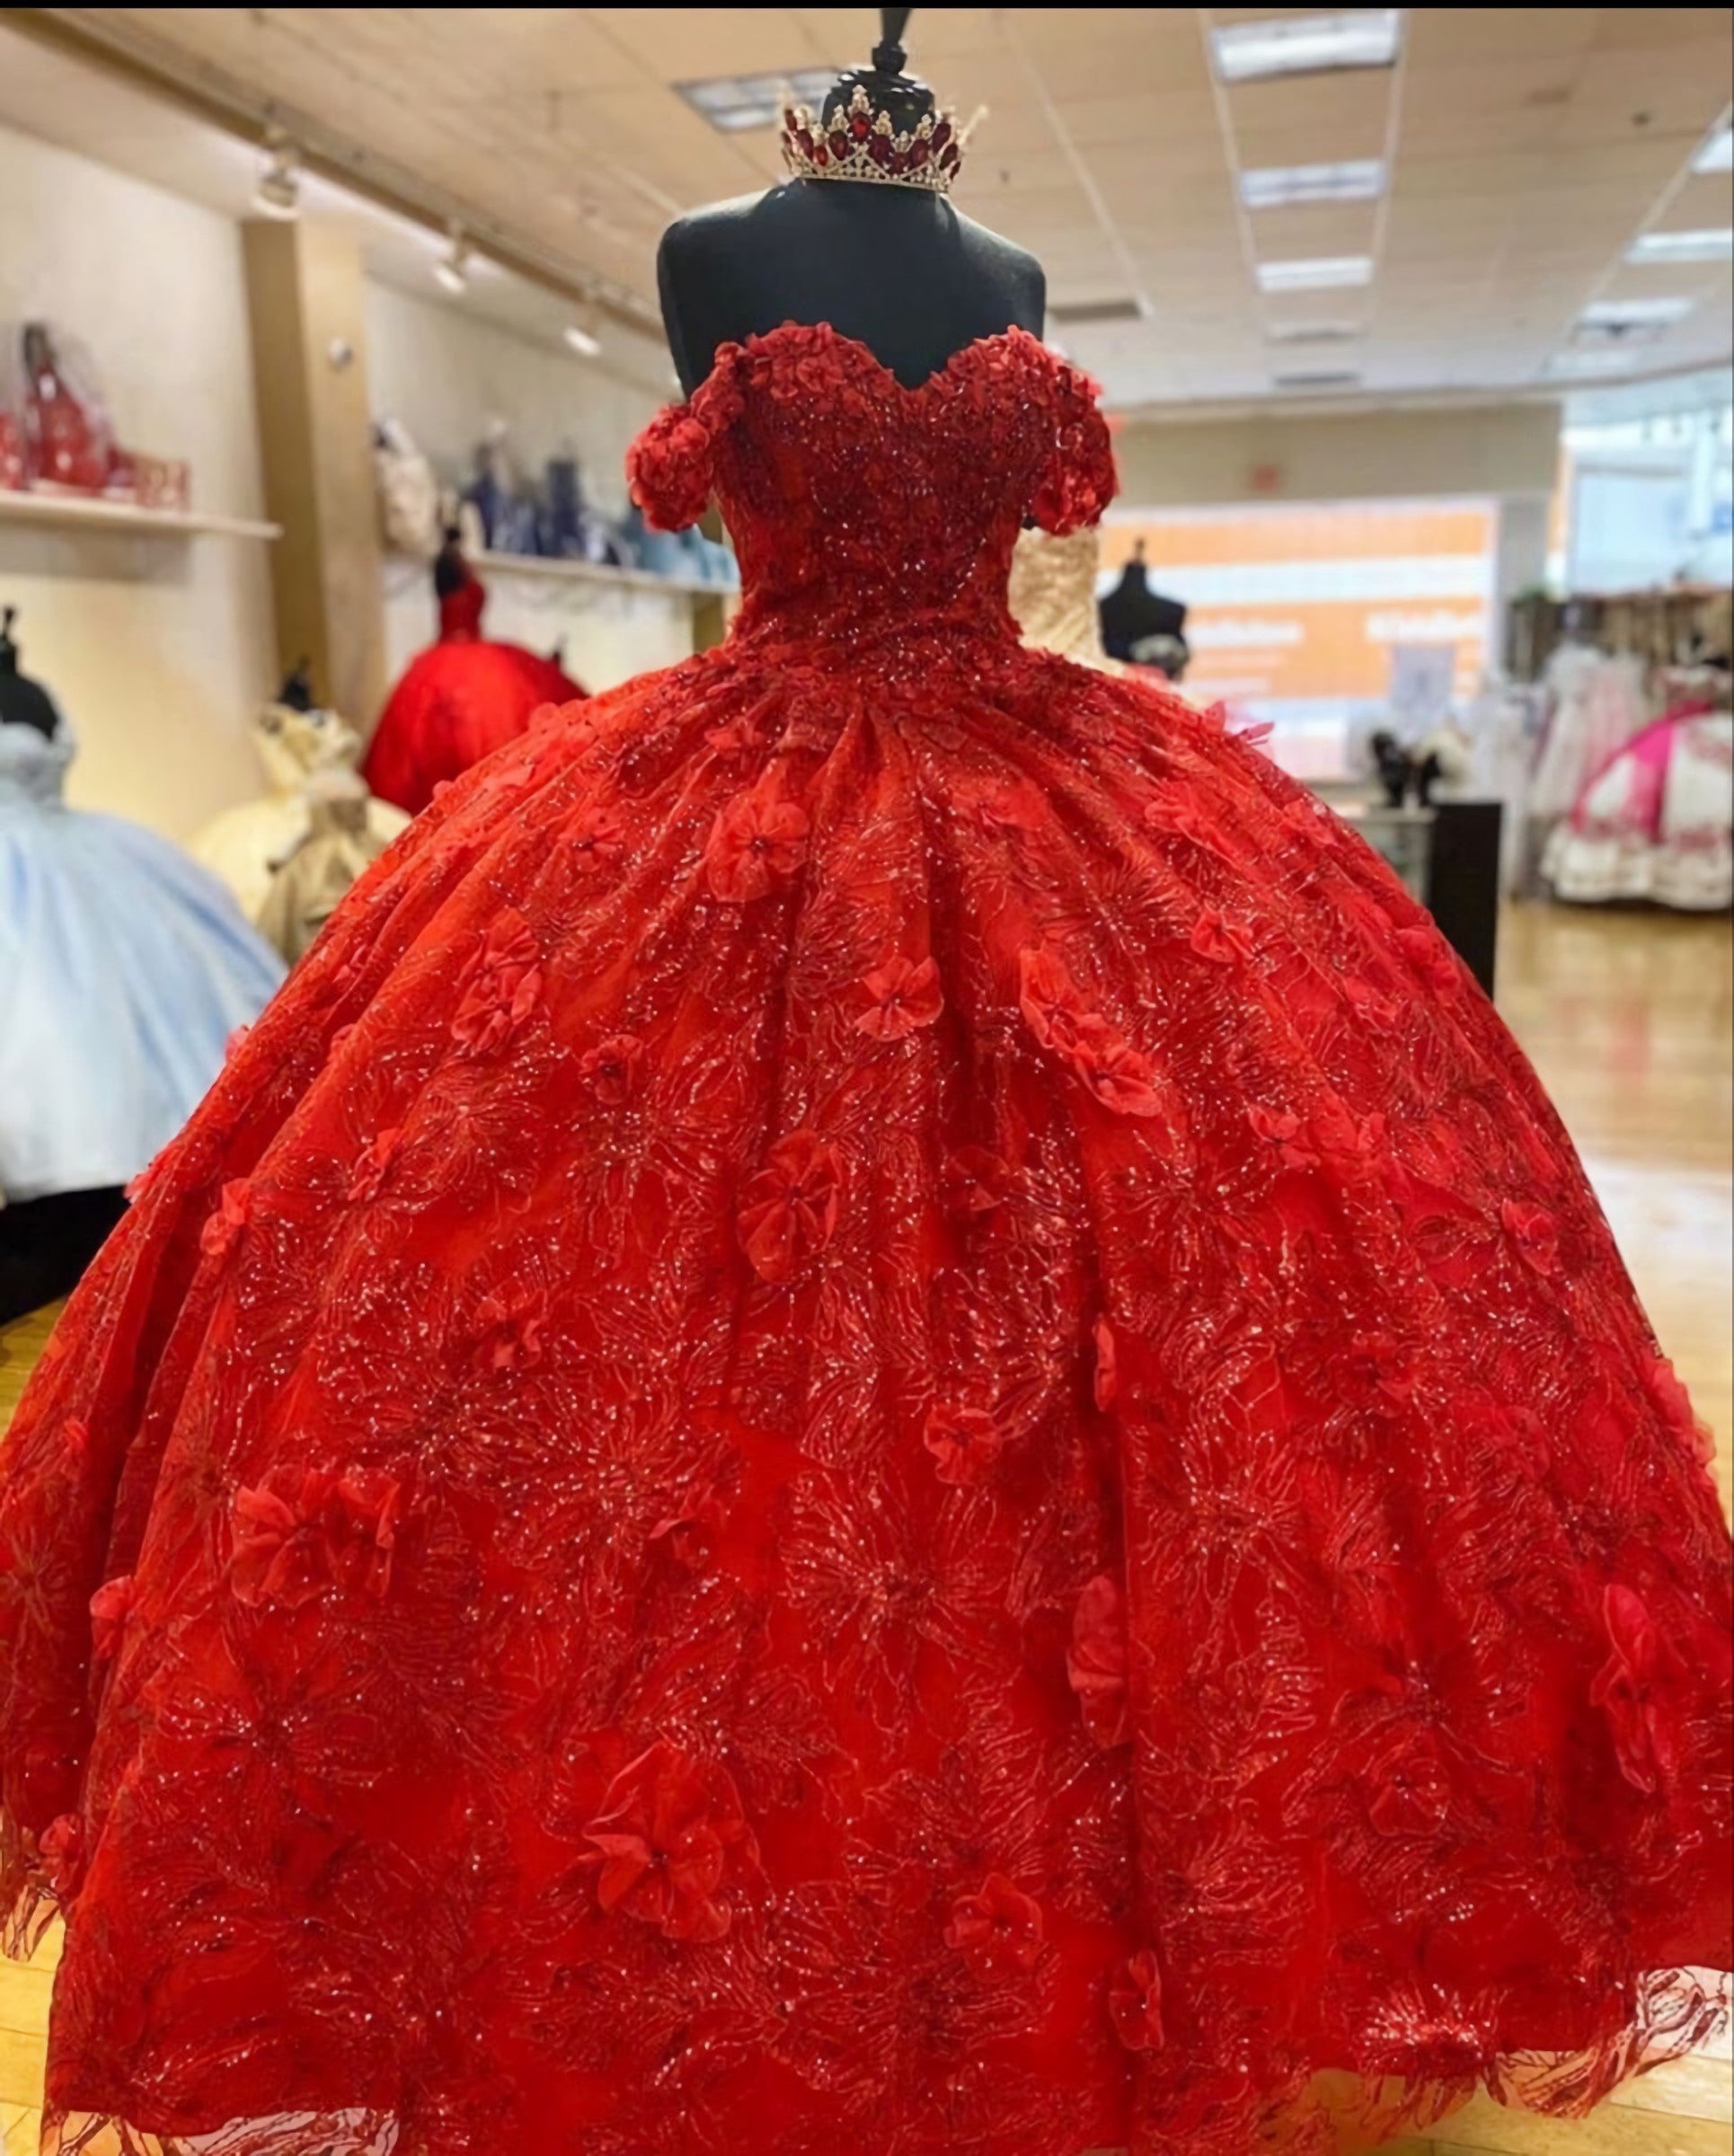 Champagne Prom Dress, Elegant Red Ball Gown Quinceanera Prom Dress, For Sweet 16